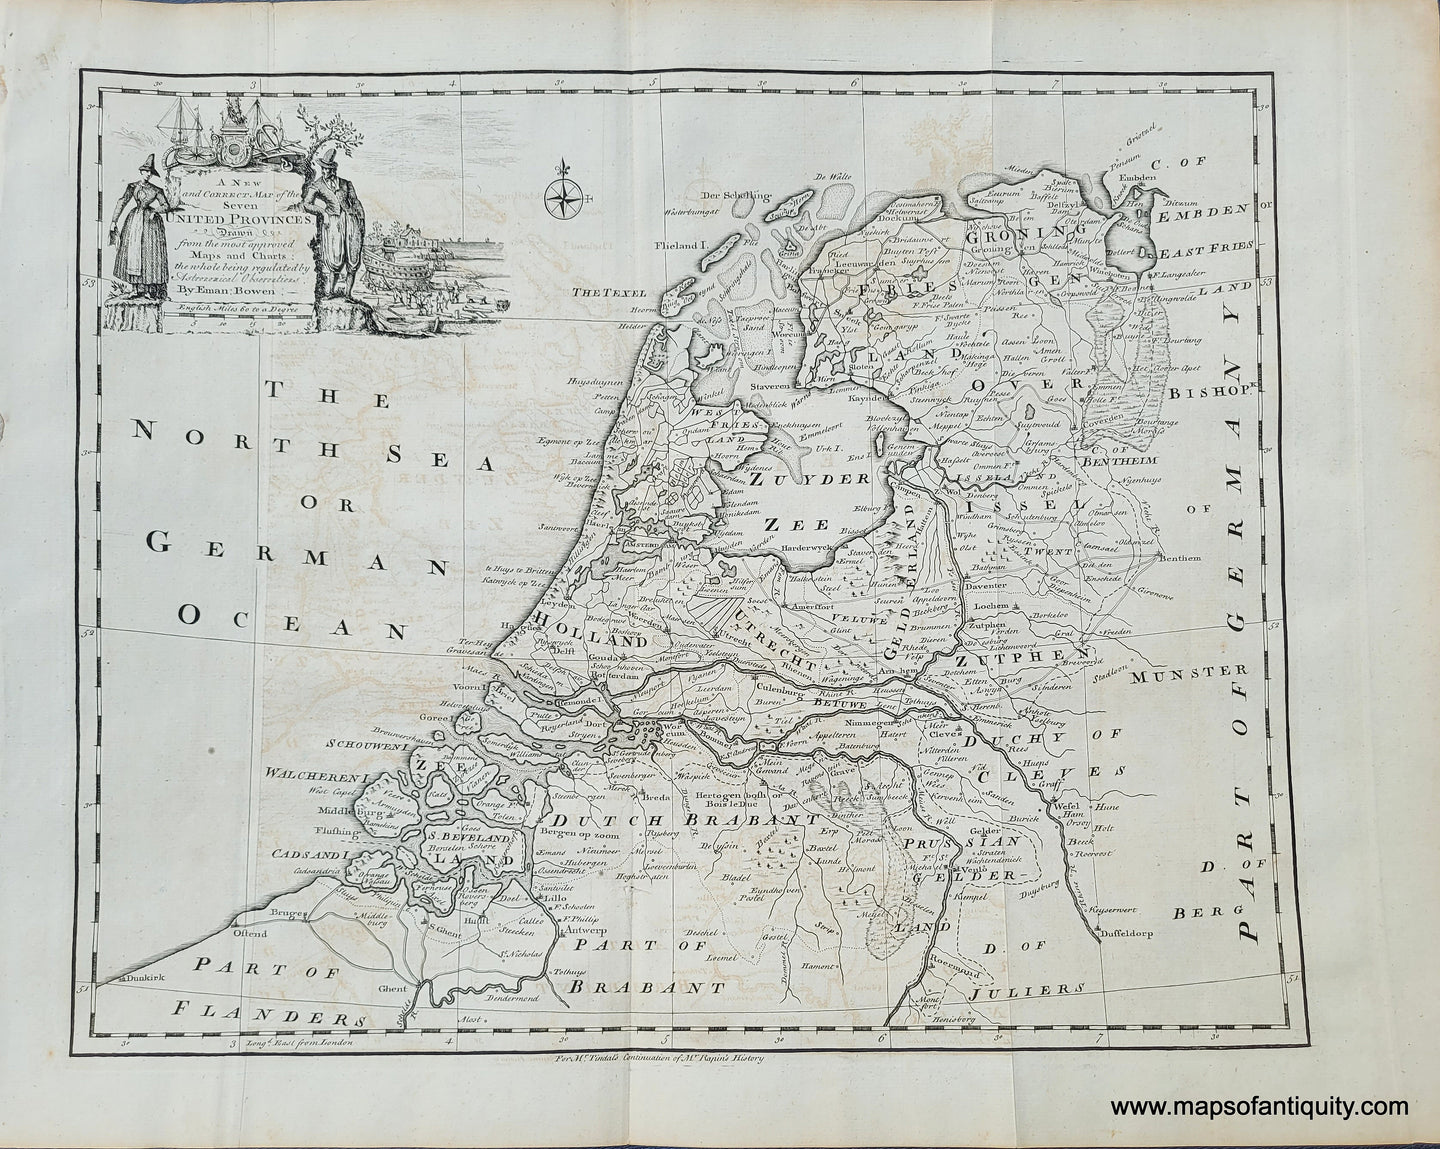 Black-and-White-Antique-Map-A-New-and-Correct-Map-of-the-Seven-United-Provinces-Drawn-from-the-most-approved-Maps-and-Charts:-the-whole-thing-being-regulated-by-Astronomical-Observations-by-Eman.-Bowen.-Europe-Holland-1745-Tindal/Rapin-Maps-Of-Antiquity